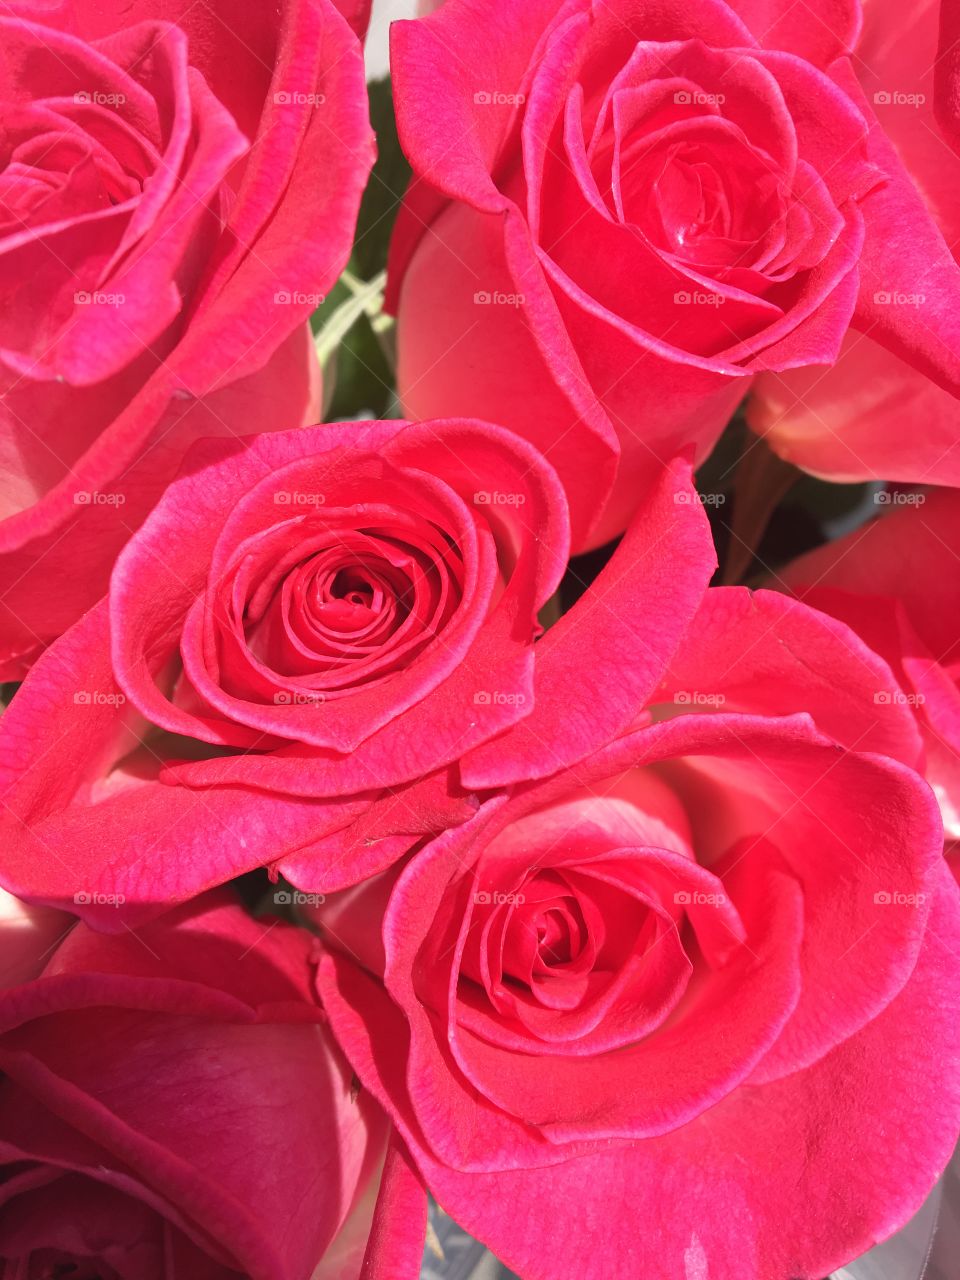 Hot pink roses in bloom